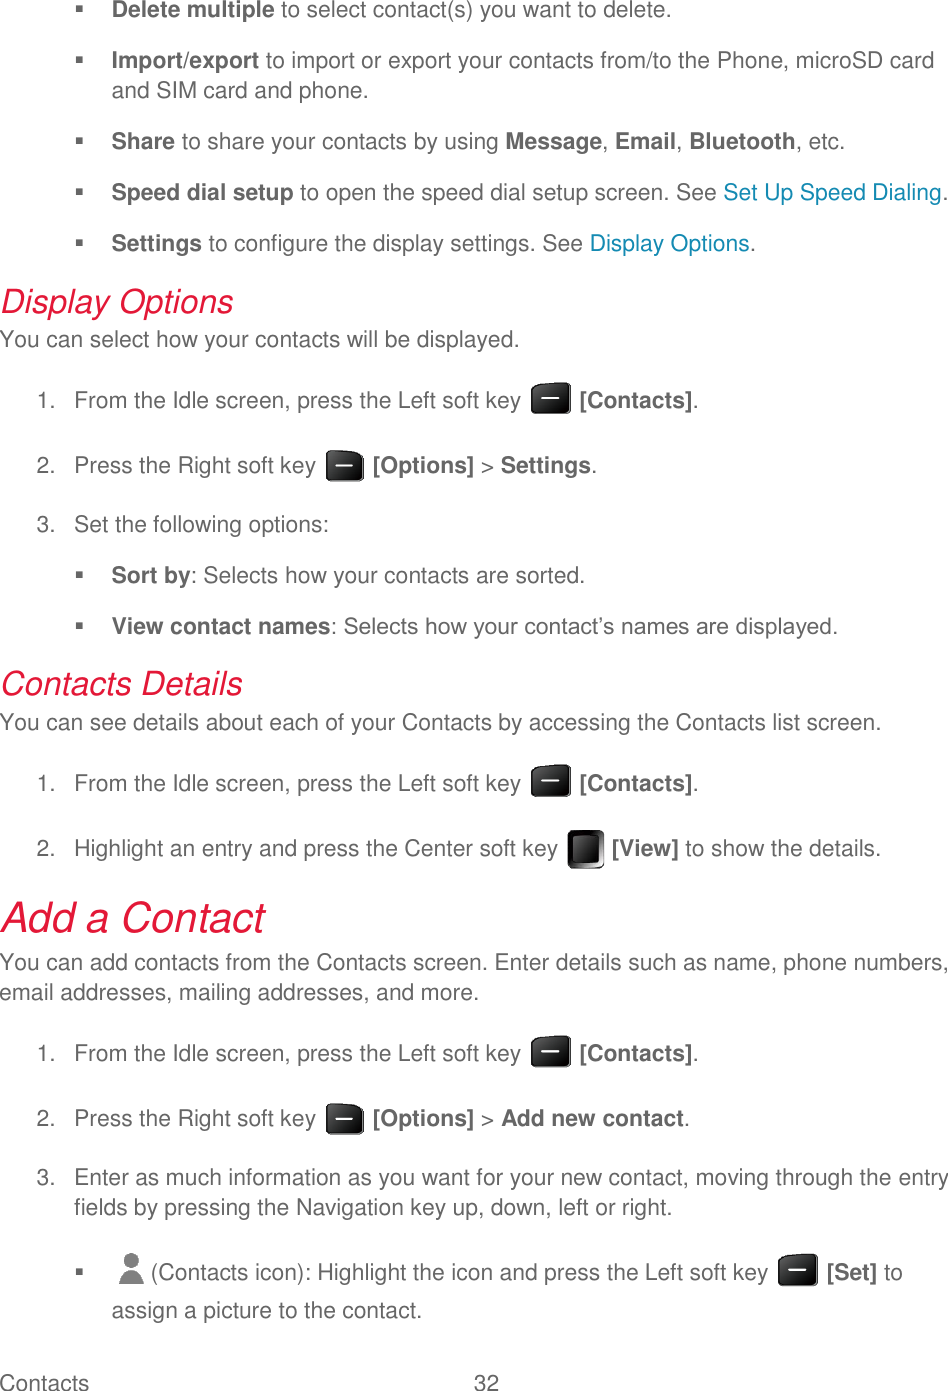 Contacts  32    Delete multiple to select contact(s) you want to delete.  Import/export to import or export your contacts from/to the Phone, microSD card and SIM card and phone.  Share to share your contacts by using Message, Email, Bluetooth, etc.  Speed dial setup to open the speed dial setup screen. See Set Up Speed Dialing.  Settings to configure the display settings. See Display Options. Display Options You can select how your contacts will be displayed.   From the Idle screen, press the Left soft key   [Contacts]. 1.  Press the Right soft key   [Options] &gt; Settings. 2.  Set the following options: 3. Sort by: Selects how your contacts are sorted.  View contact names: Selects how your contact’s names are displayed. Contacts Details You can see details about each of your Contacts by accessing the Contacts list screen.   From the Idle screen, press the Left soft key   [Contacts]. 1.  Highlight an entry and press the Center soft key   [View] to show the details. 2.Add a Contact You can add contacts from the Contacts screen. Enter details such as name, phone numbers, email addresses, mailing addresses, and more.   From the Idle screen, press the Left soft key   [Contacts]. 1.  Press the Right soft key   [Options] &gt; Add new contact. 2.  Enter as much information as you want for your new contact, moving through the entry 3.fields by pressing the Navigation key up, down, left or right.   (Contacts icon): Highlight the icon and press the Left soft key   [Set] to assign a picture to the contact. 